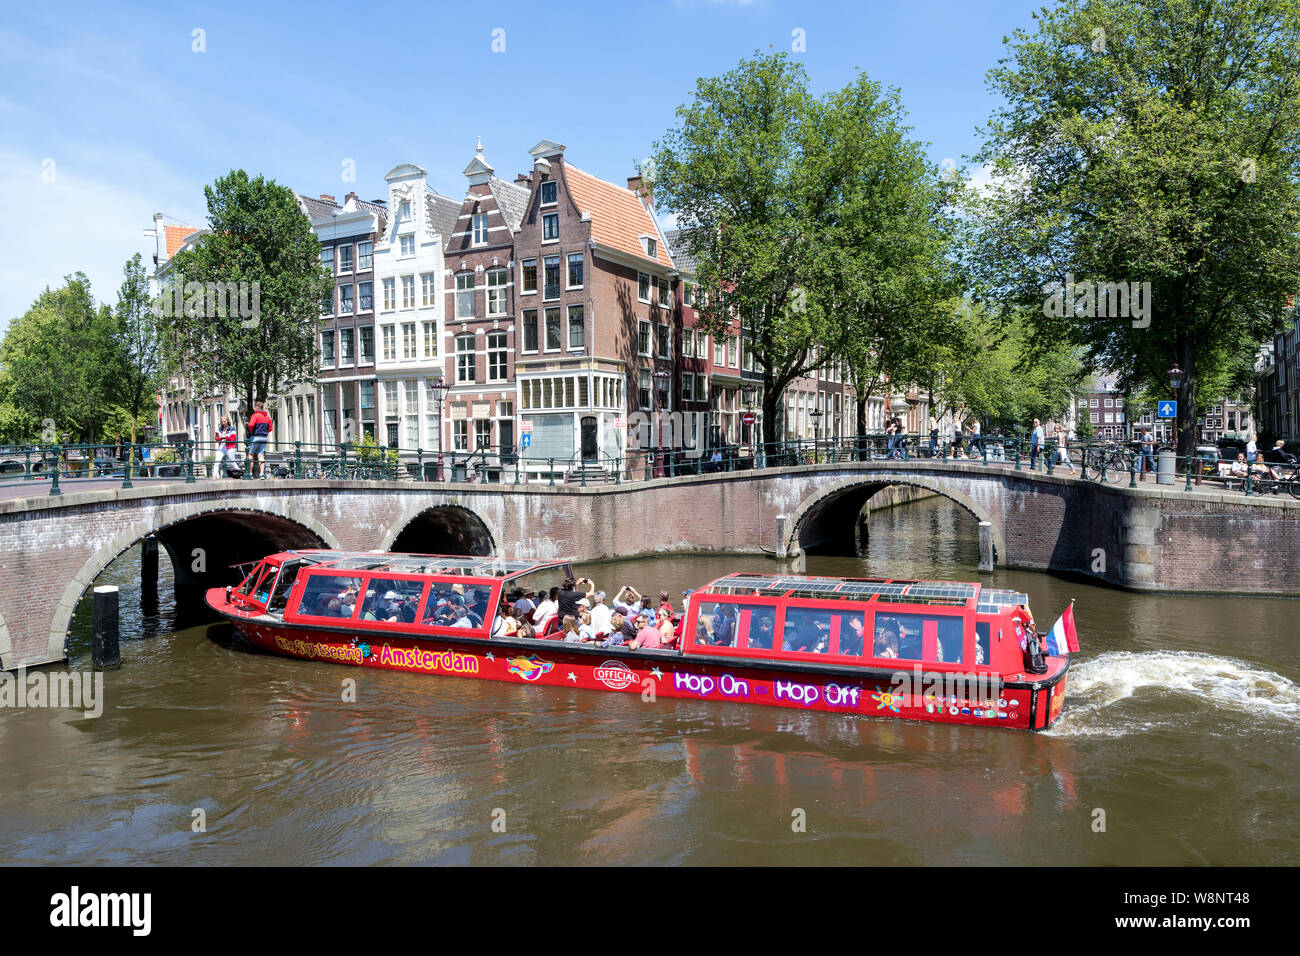 Amsterdam canal boat BZN 5 of City Sightseeing Amsterdam at Keizersgracht/ Leidsegracht intersection. Stock Photo